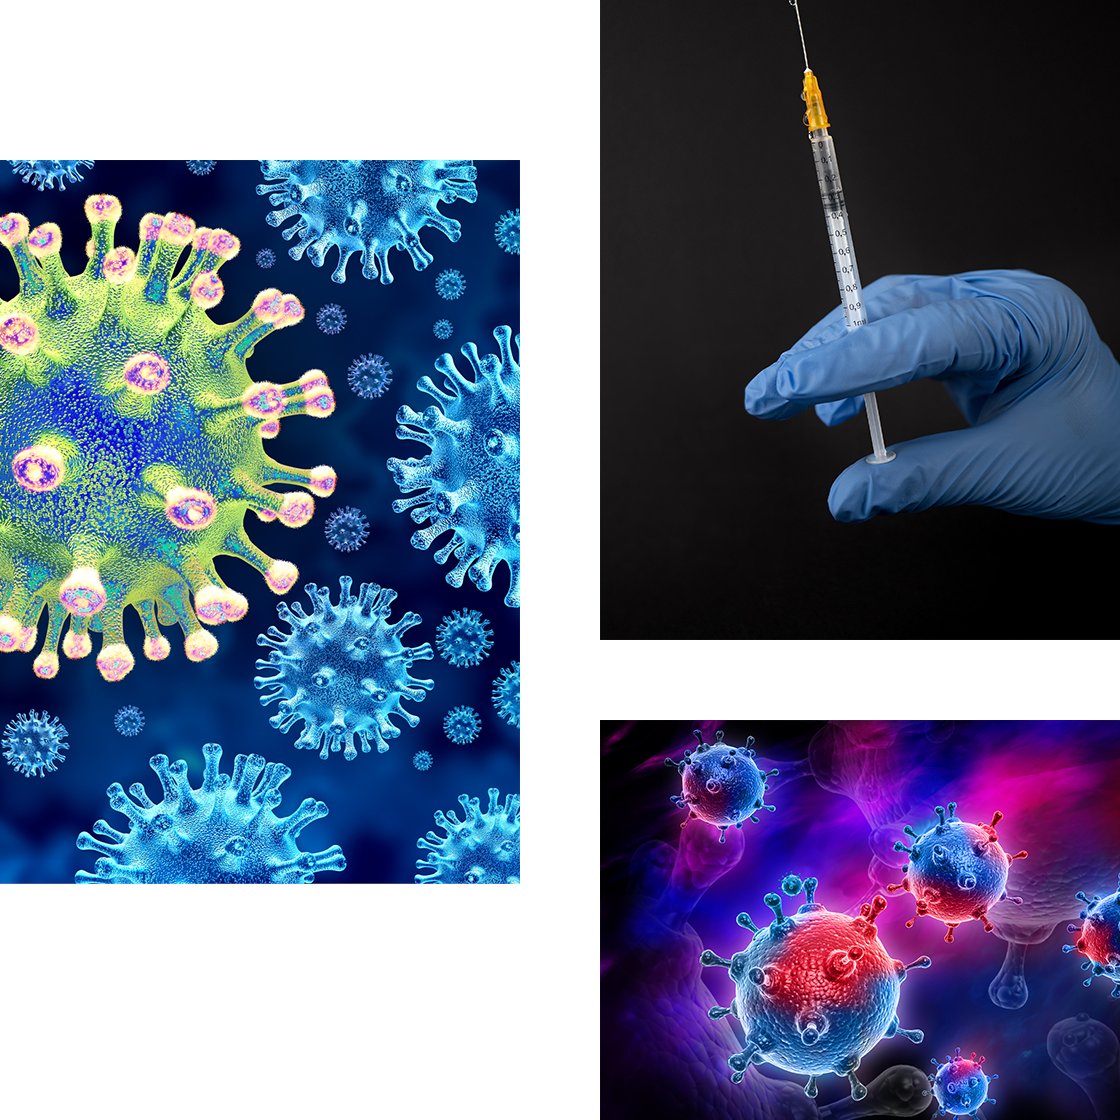 Discover our InSilicoVACCINE Suite for #vaccinedevelopment: computational tools  to streamline design, reduce costs & enhance efficacy.

Combining  #immunoinformatics #simulations & #virtualpopulations, our suite supports early design & clinical evaluation
insilicotrials.com/insilico-vacci…